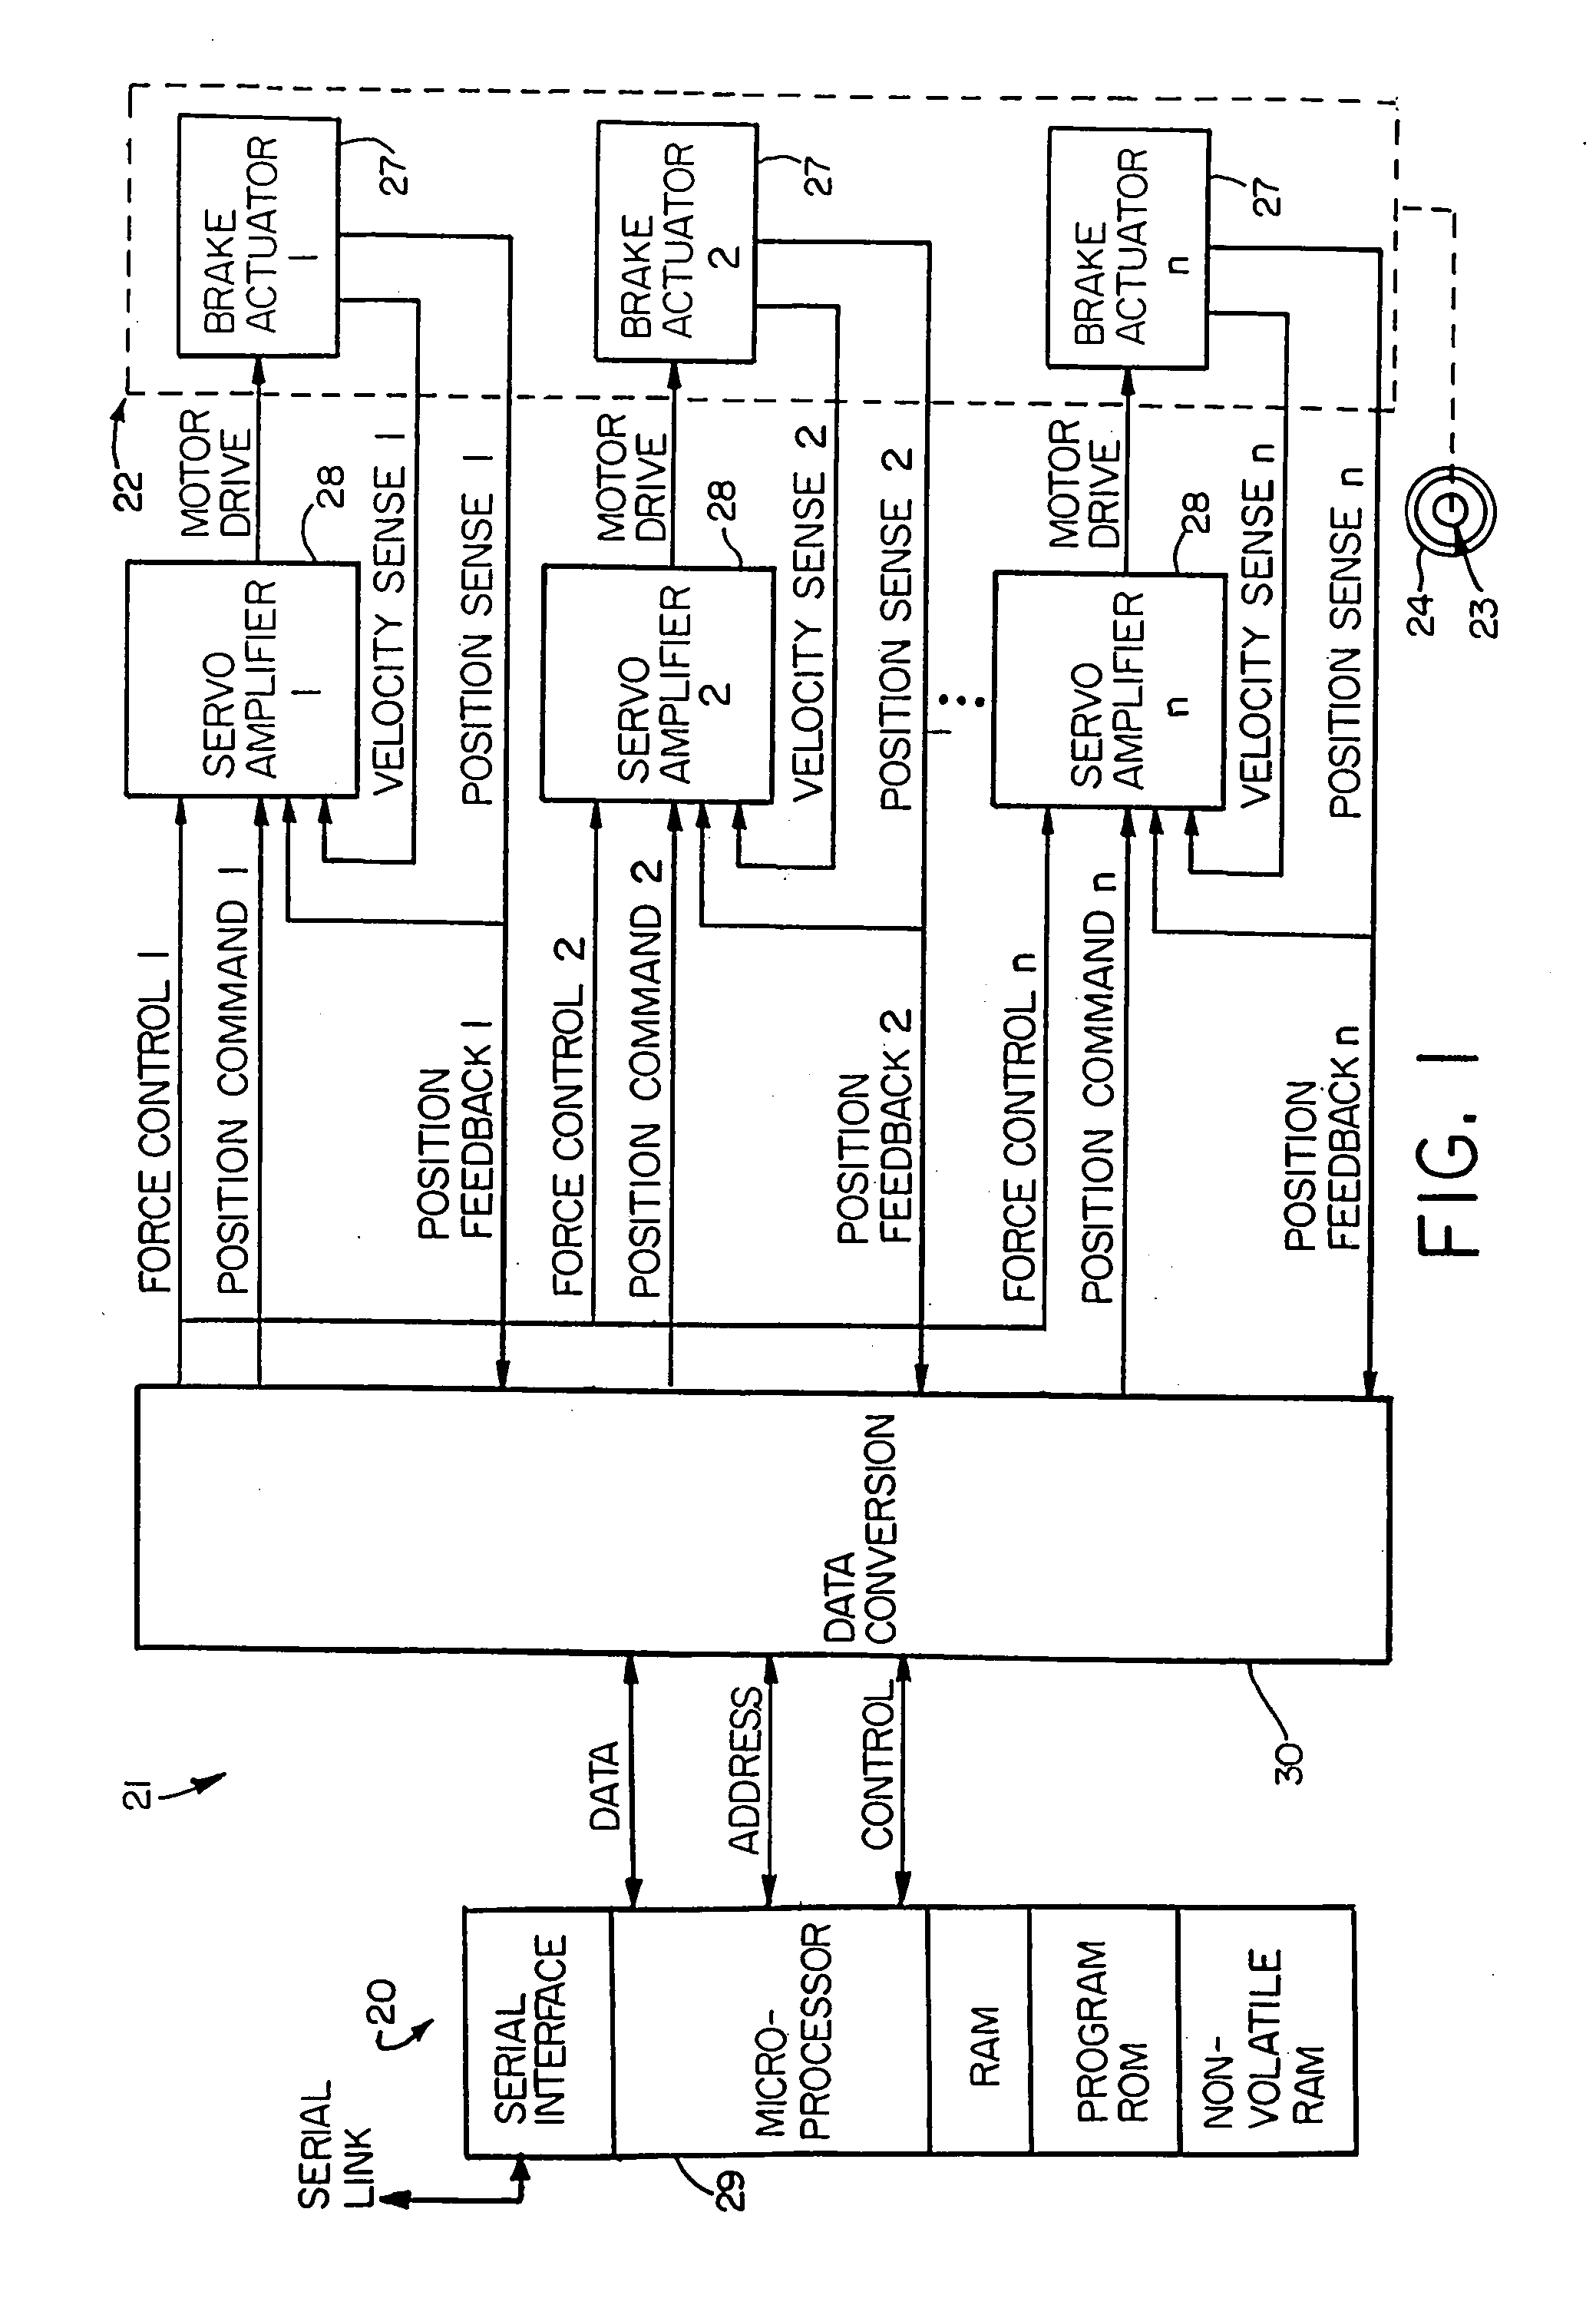 Electronic aircraft braking system with brake wear measurement, running clearance adjustment and plural electric motor- actuator ram assemblies